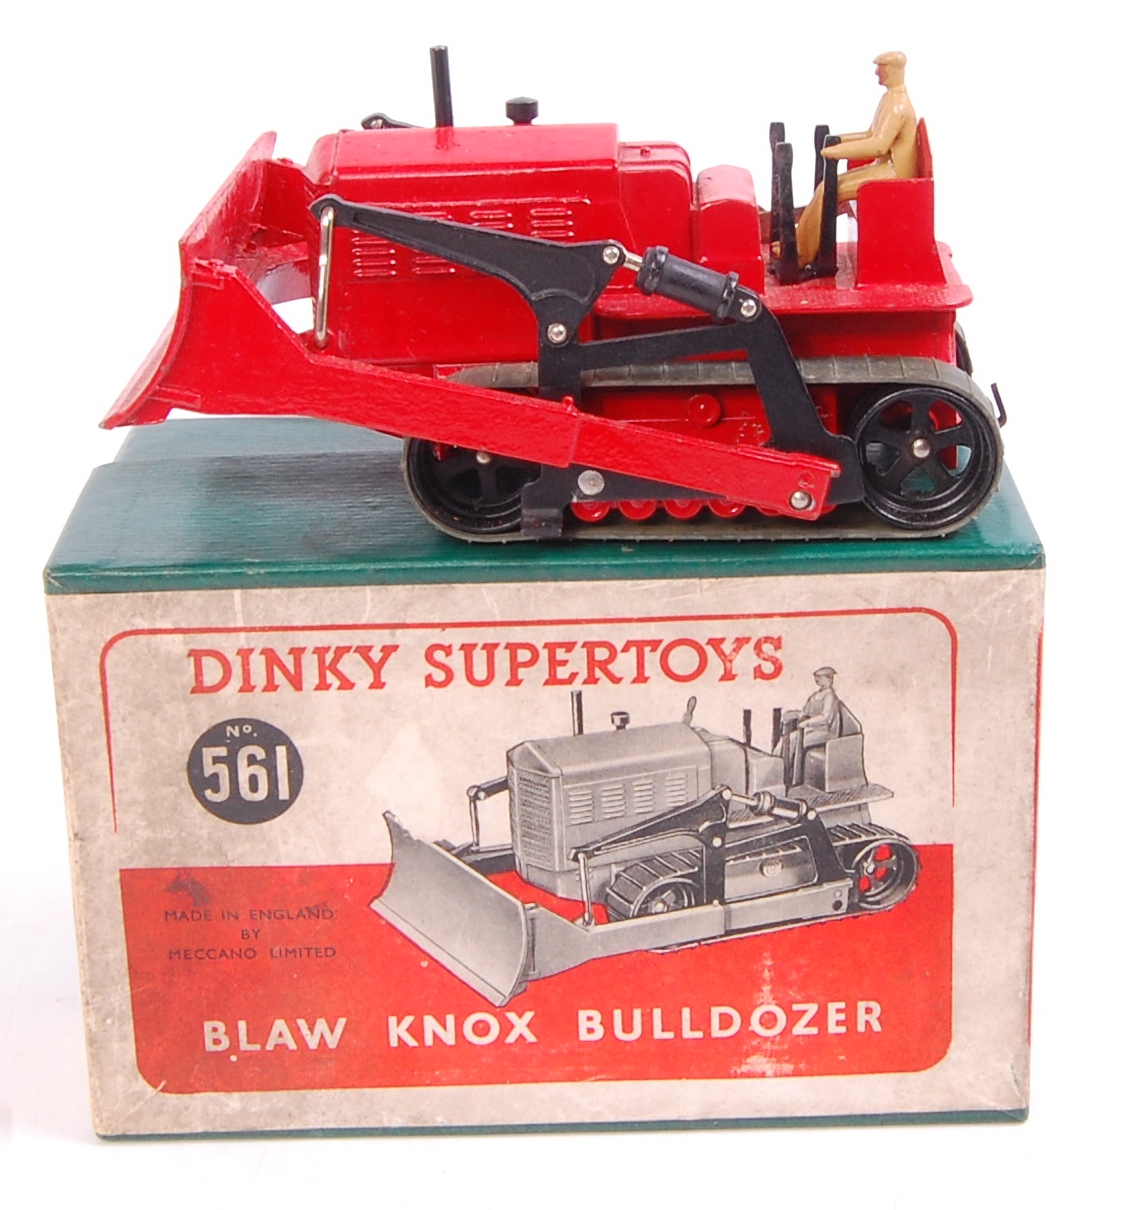 Dinky Toys, 561, Blaw Know Bulldozer, red body with driver, green tracks,